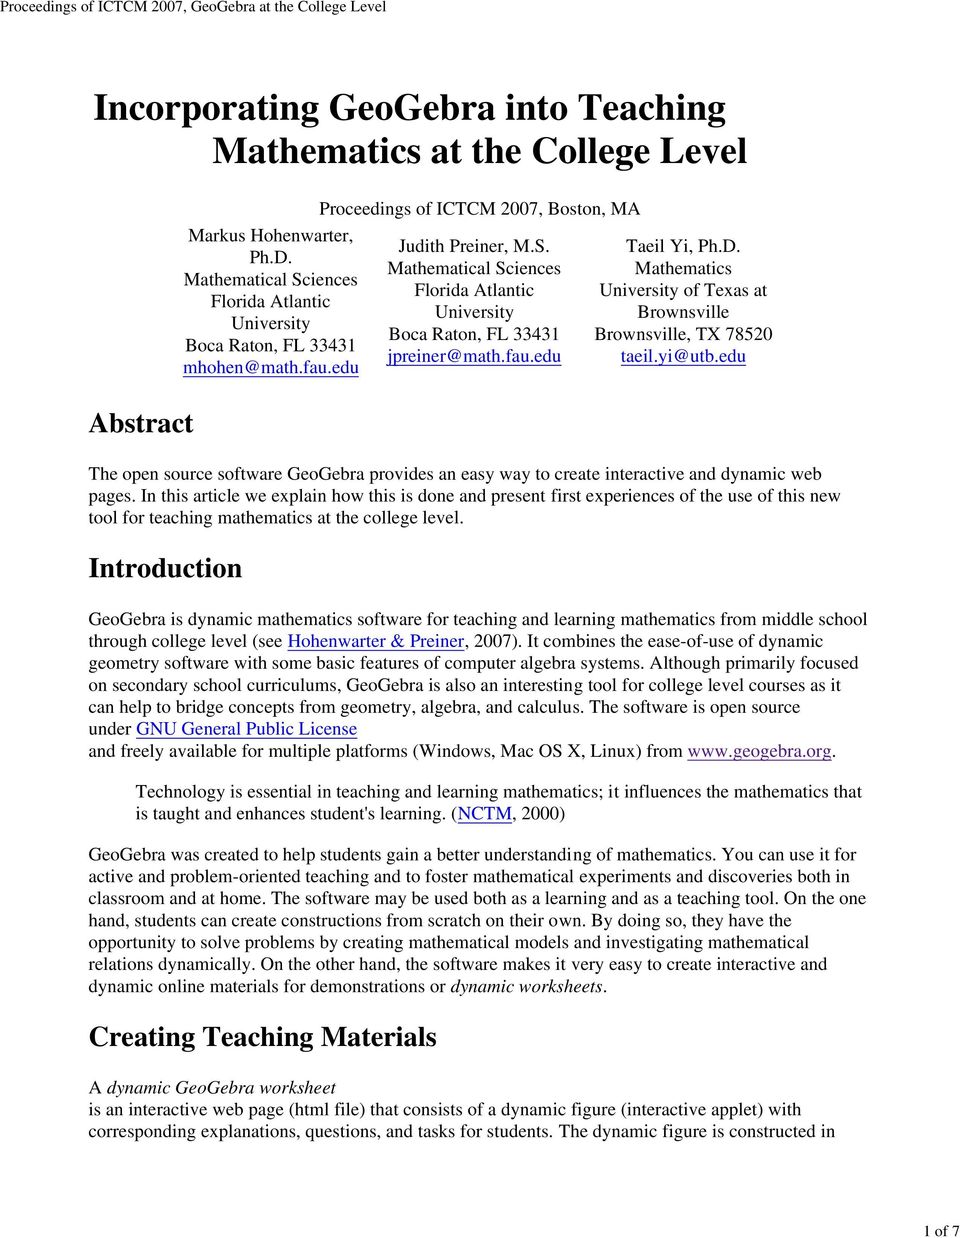 Mathematics University of Texas at Brownsville Brownsville, TX 78520 taeil.yi@utb.edu Abstract The open source software GeoGebra provides an easy way to create interactive and dynamic web pages.